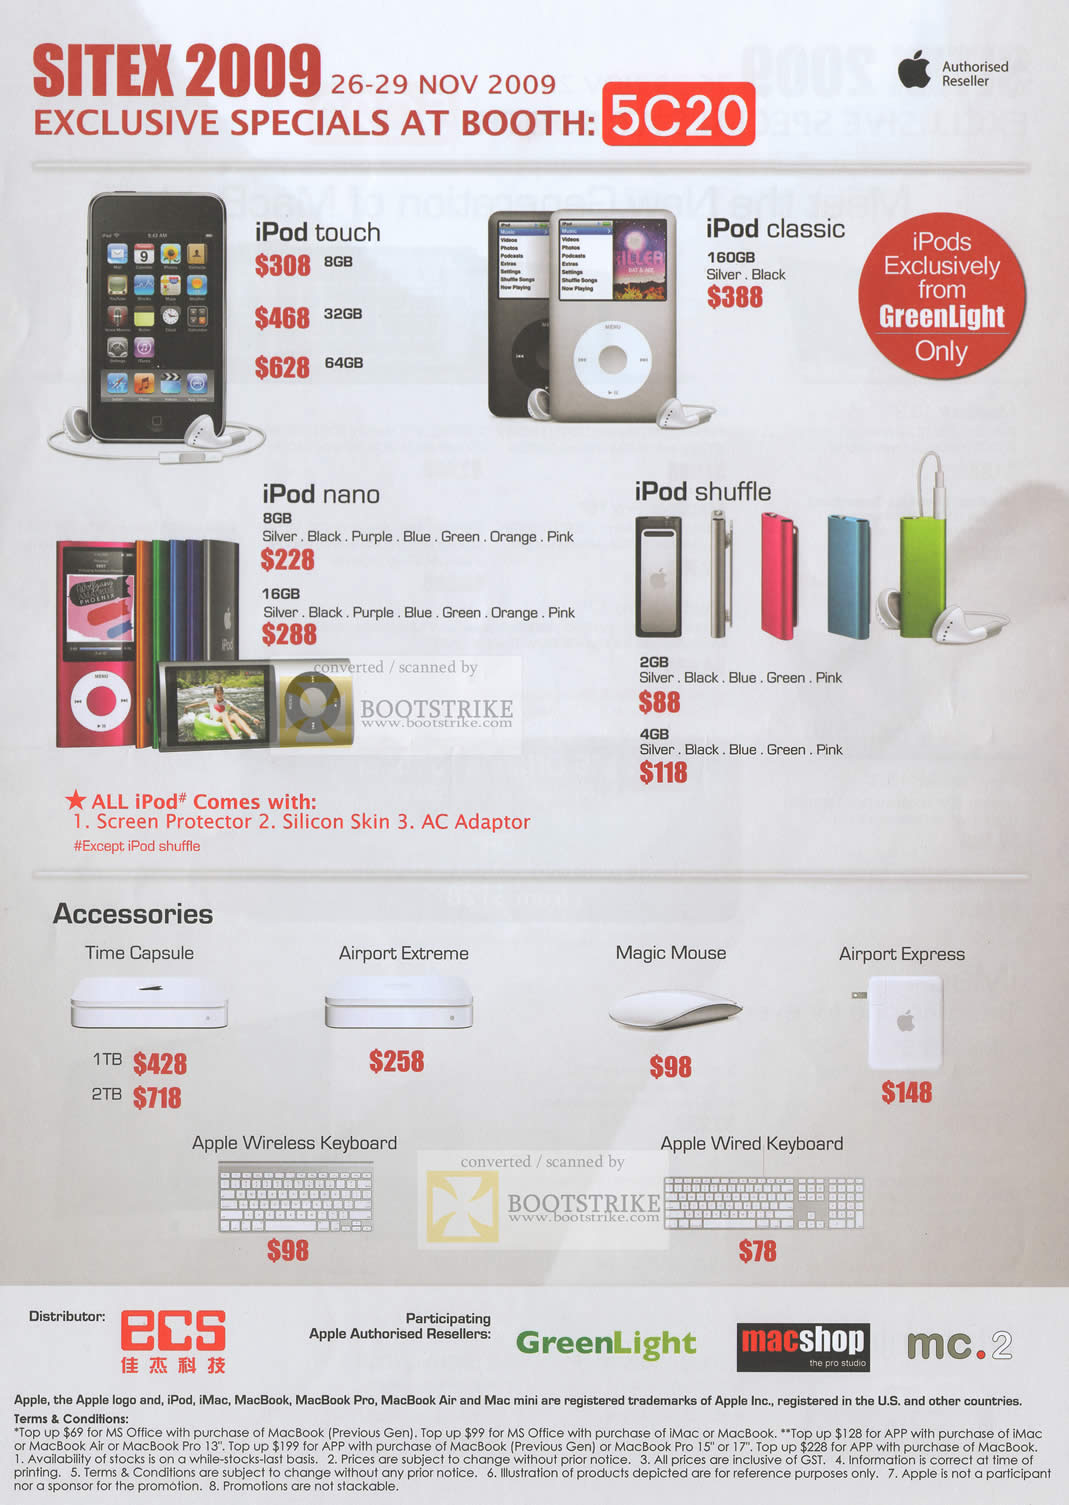 Sitex 2009 price list image brochure of Apple IPod Touch Classic Nano Shuffle Time Capsule Airport Extreme Magic Mouse